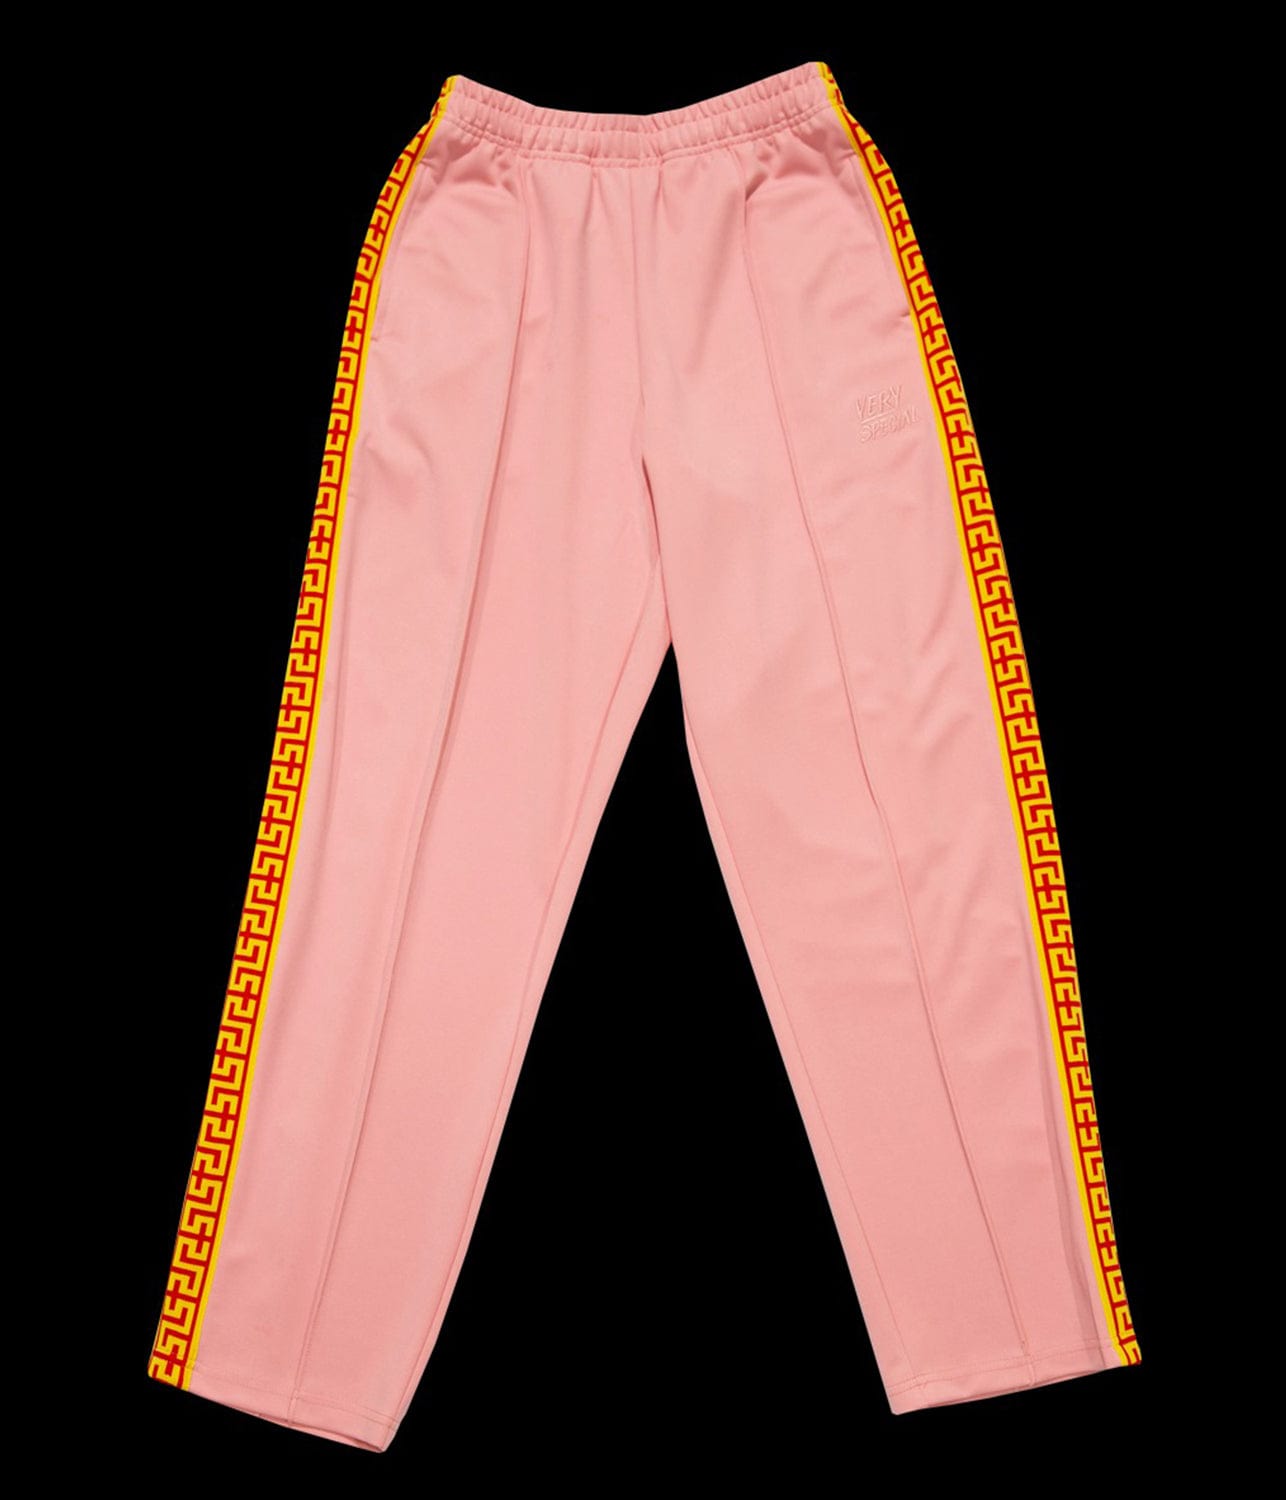 GEO TRACK PANT - PINK | SOMETHING VERY SPECIAL |  SOMETHING VERY SPECIAL GEO TRACK PANT - PINK